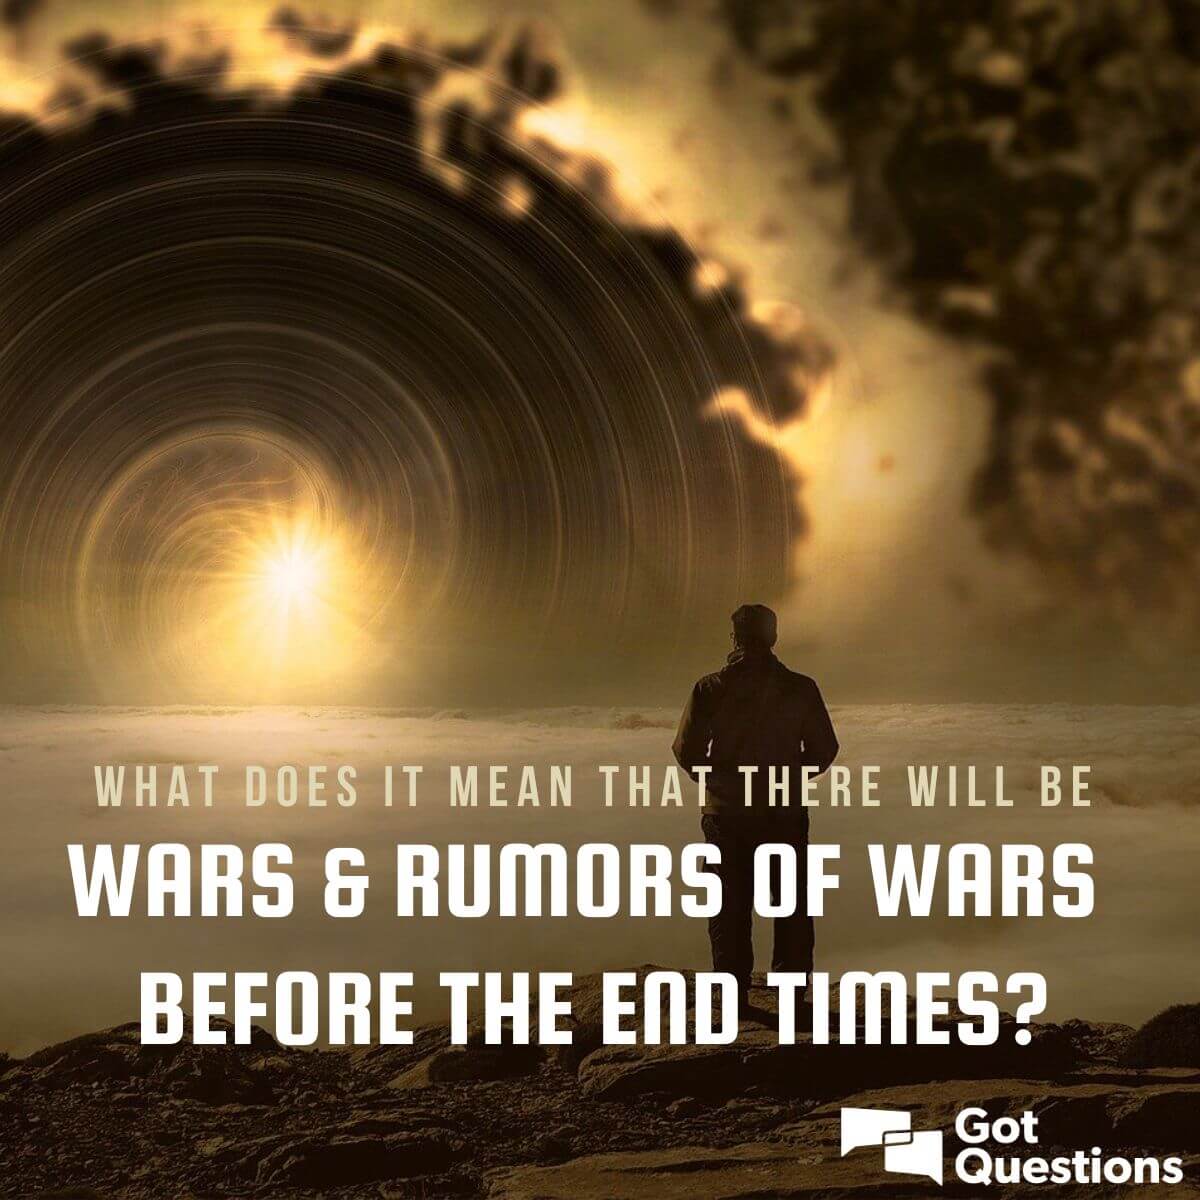 What does it mean that there will be wars and rumors of wars before the